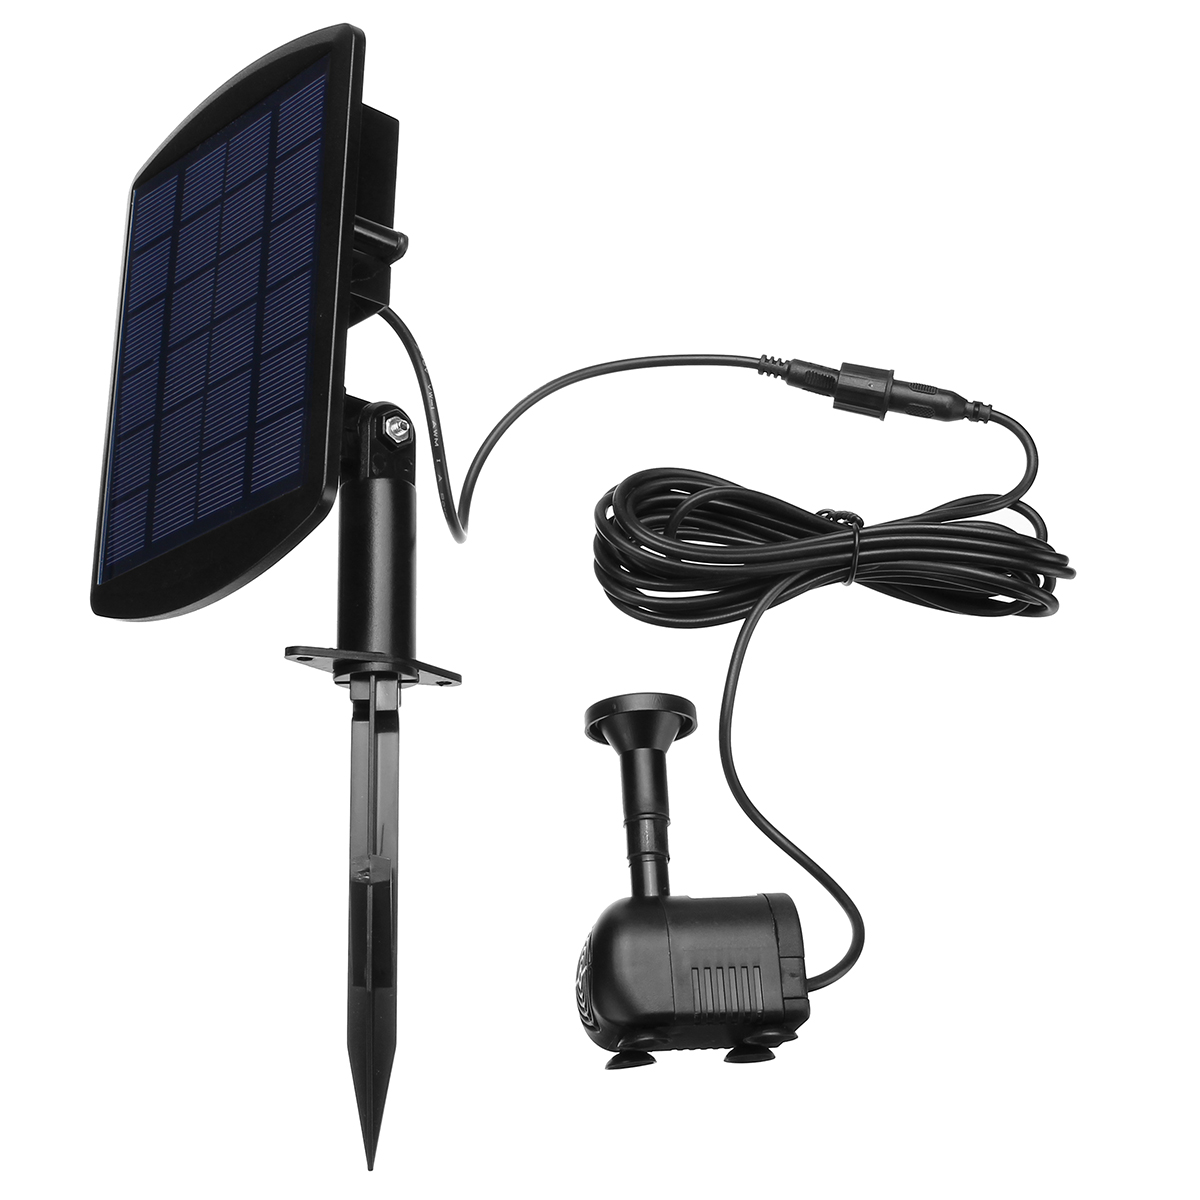 

6V 1.8W Solar Panel Powered Water Fountain Pump For Pool Pond Garden Outdoor Submersible